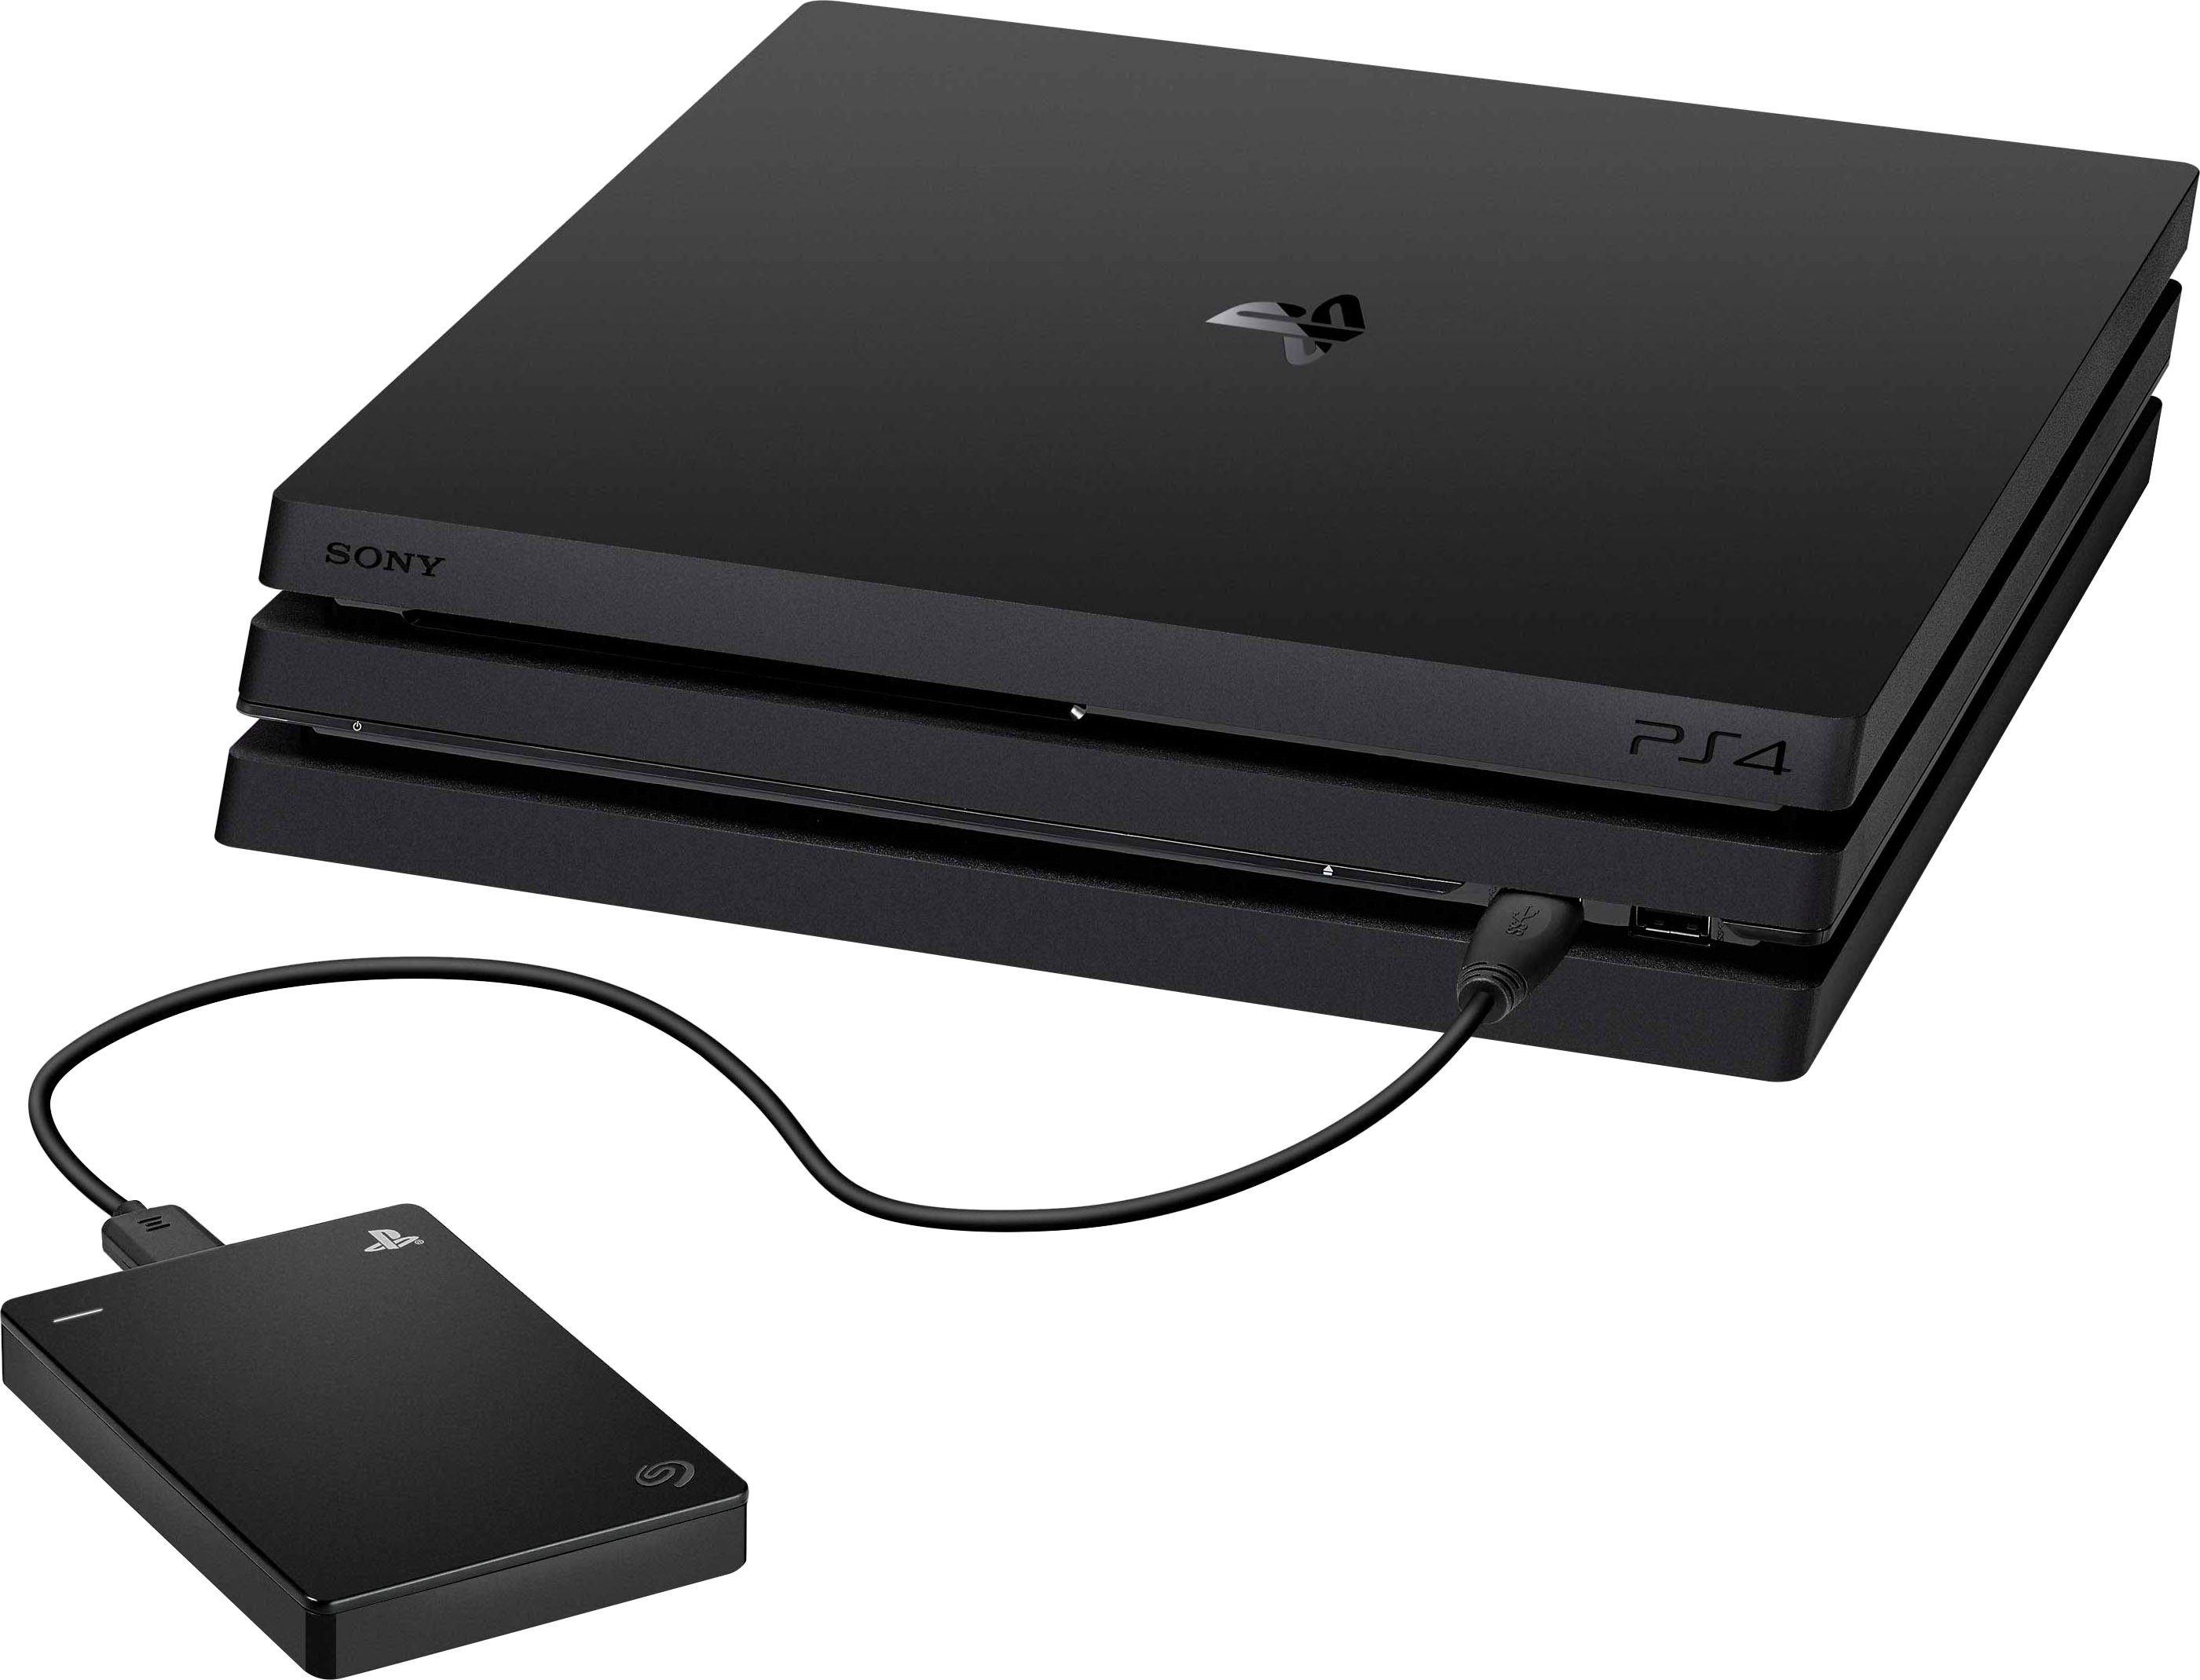 Mbps TB) PS4/PS5 3.0) 4TB Drive (4 480 2.0) 5.0 externe für (USB HDD-Festplatte Seagate MB/S / Gbps Game Lesegeschwindigkeit (USB